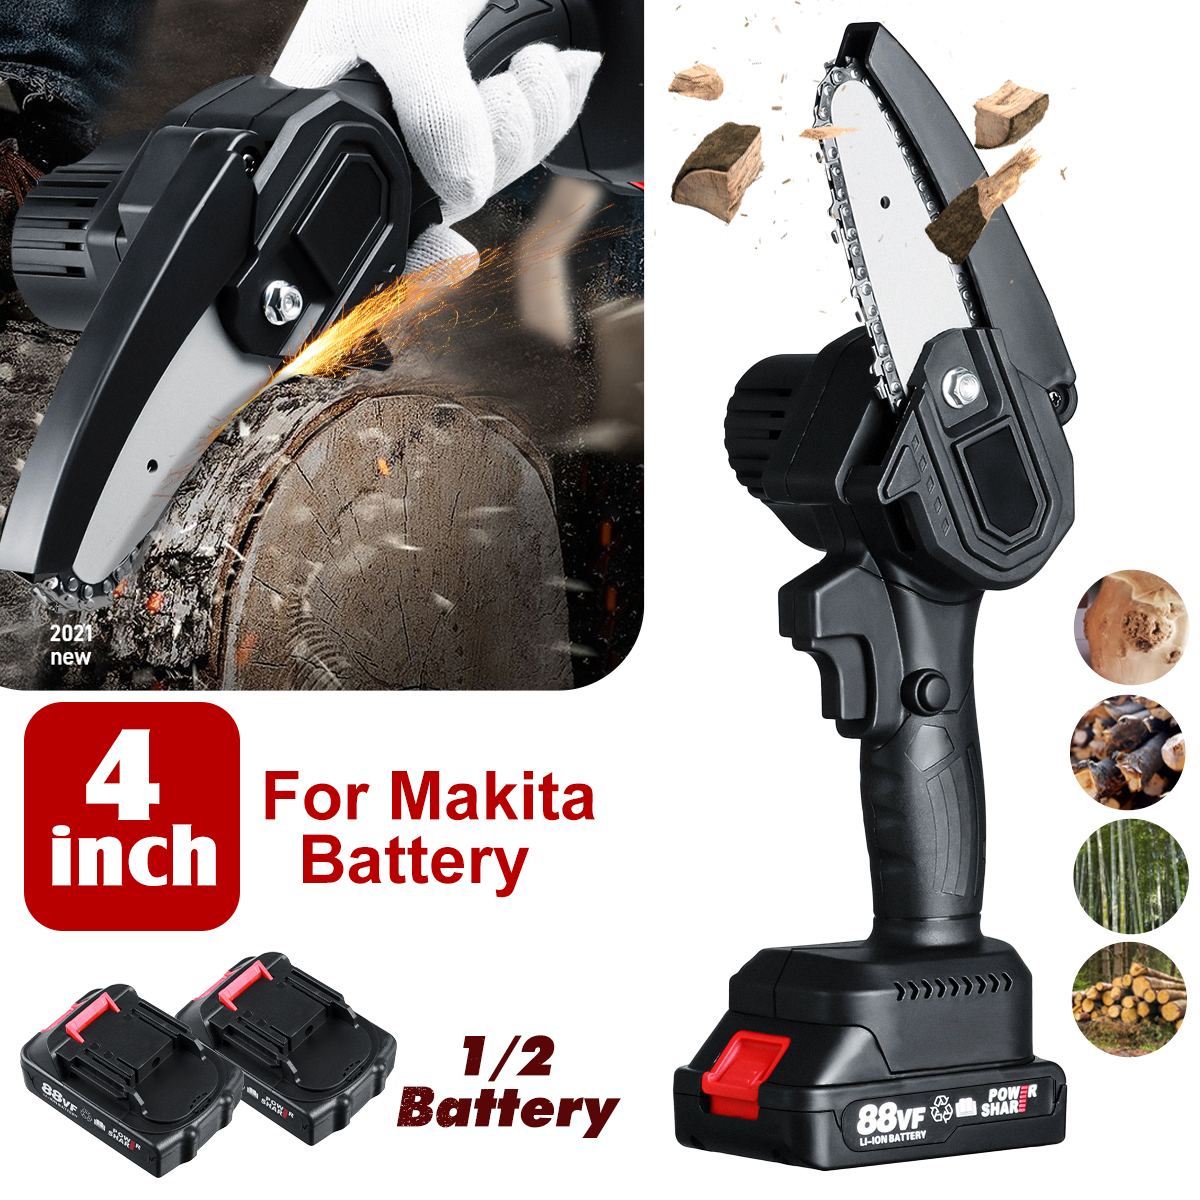 21V-Cordless-Electric-Chainsaw-Chain-Saw-Handheld-Garden-Wood-Cutting-Tool-with-Battery-Adapted-To-M-1816551-2